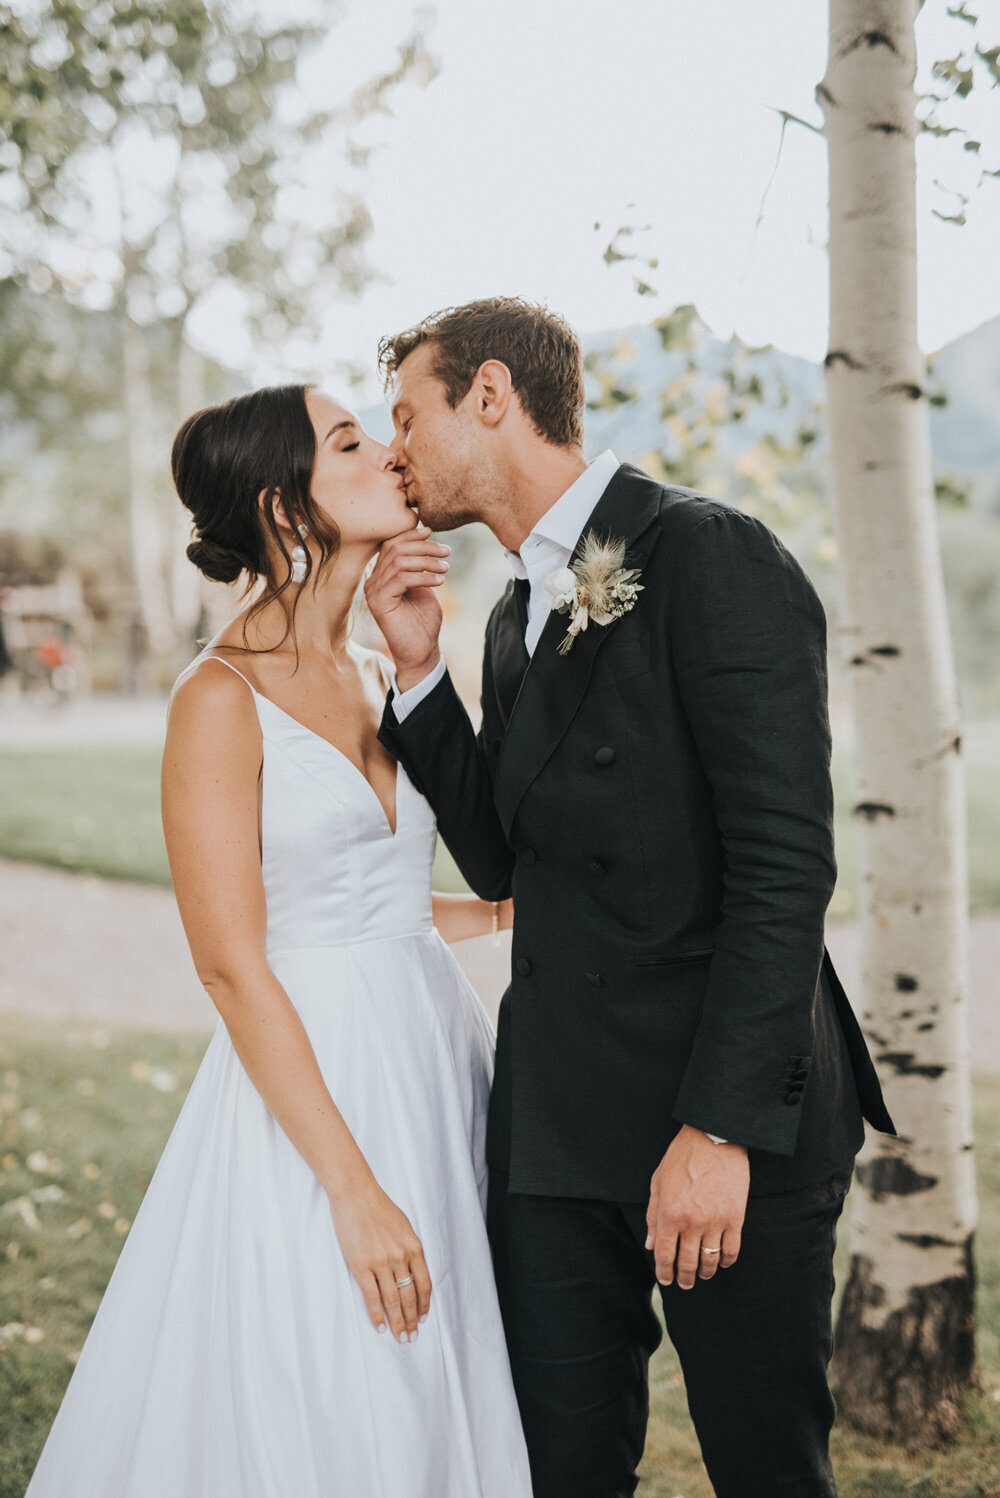 Bride and groom sharing a kiss in front of aspen trees in Colorado